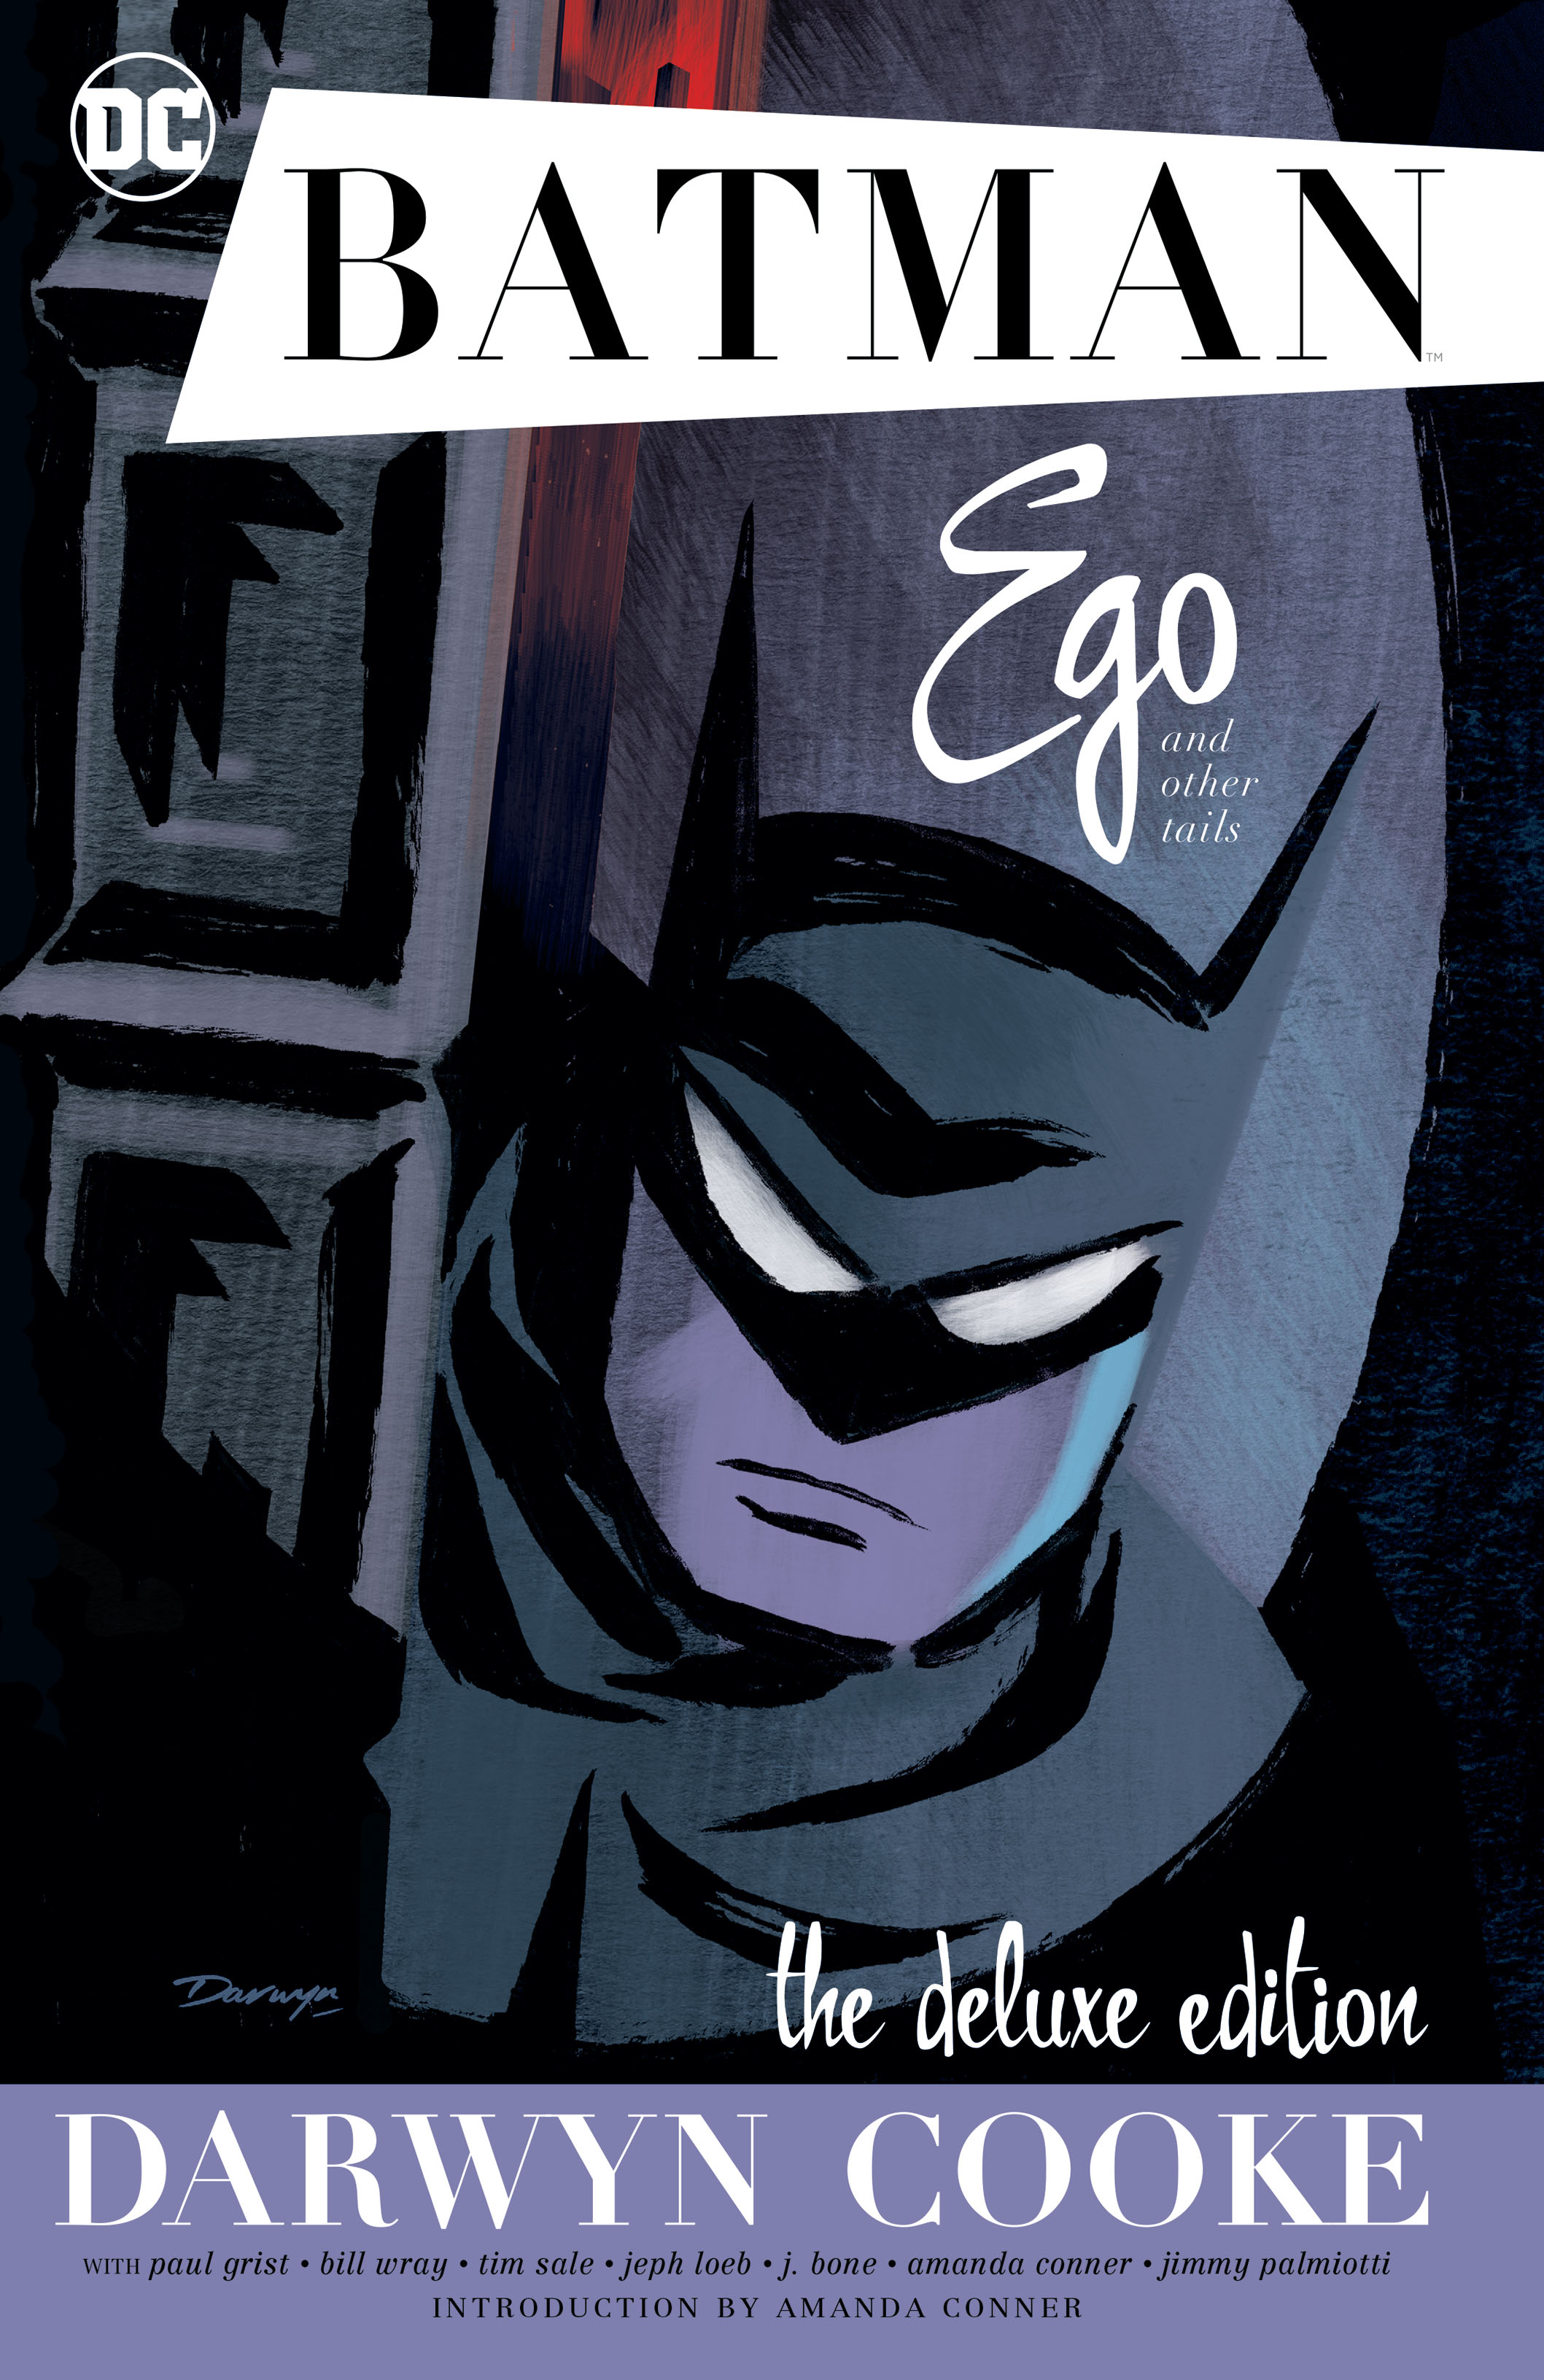 Batman: Ego and Other Tails- The Deluxe Edition review | Batman News